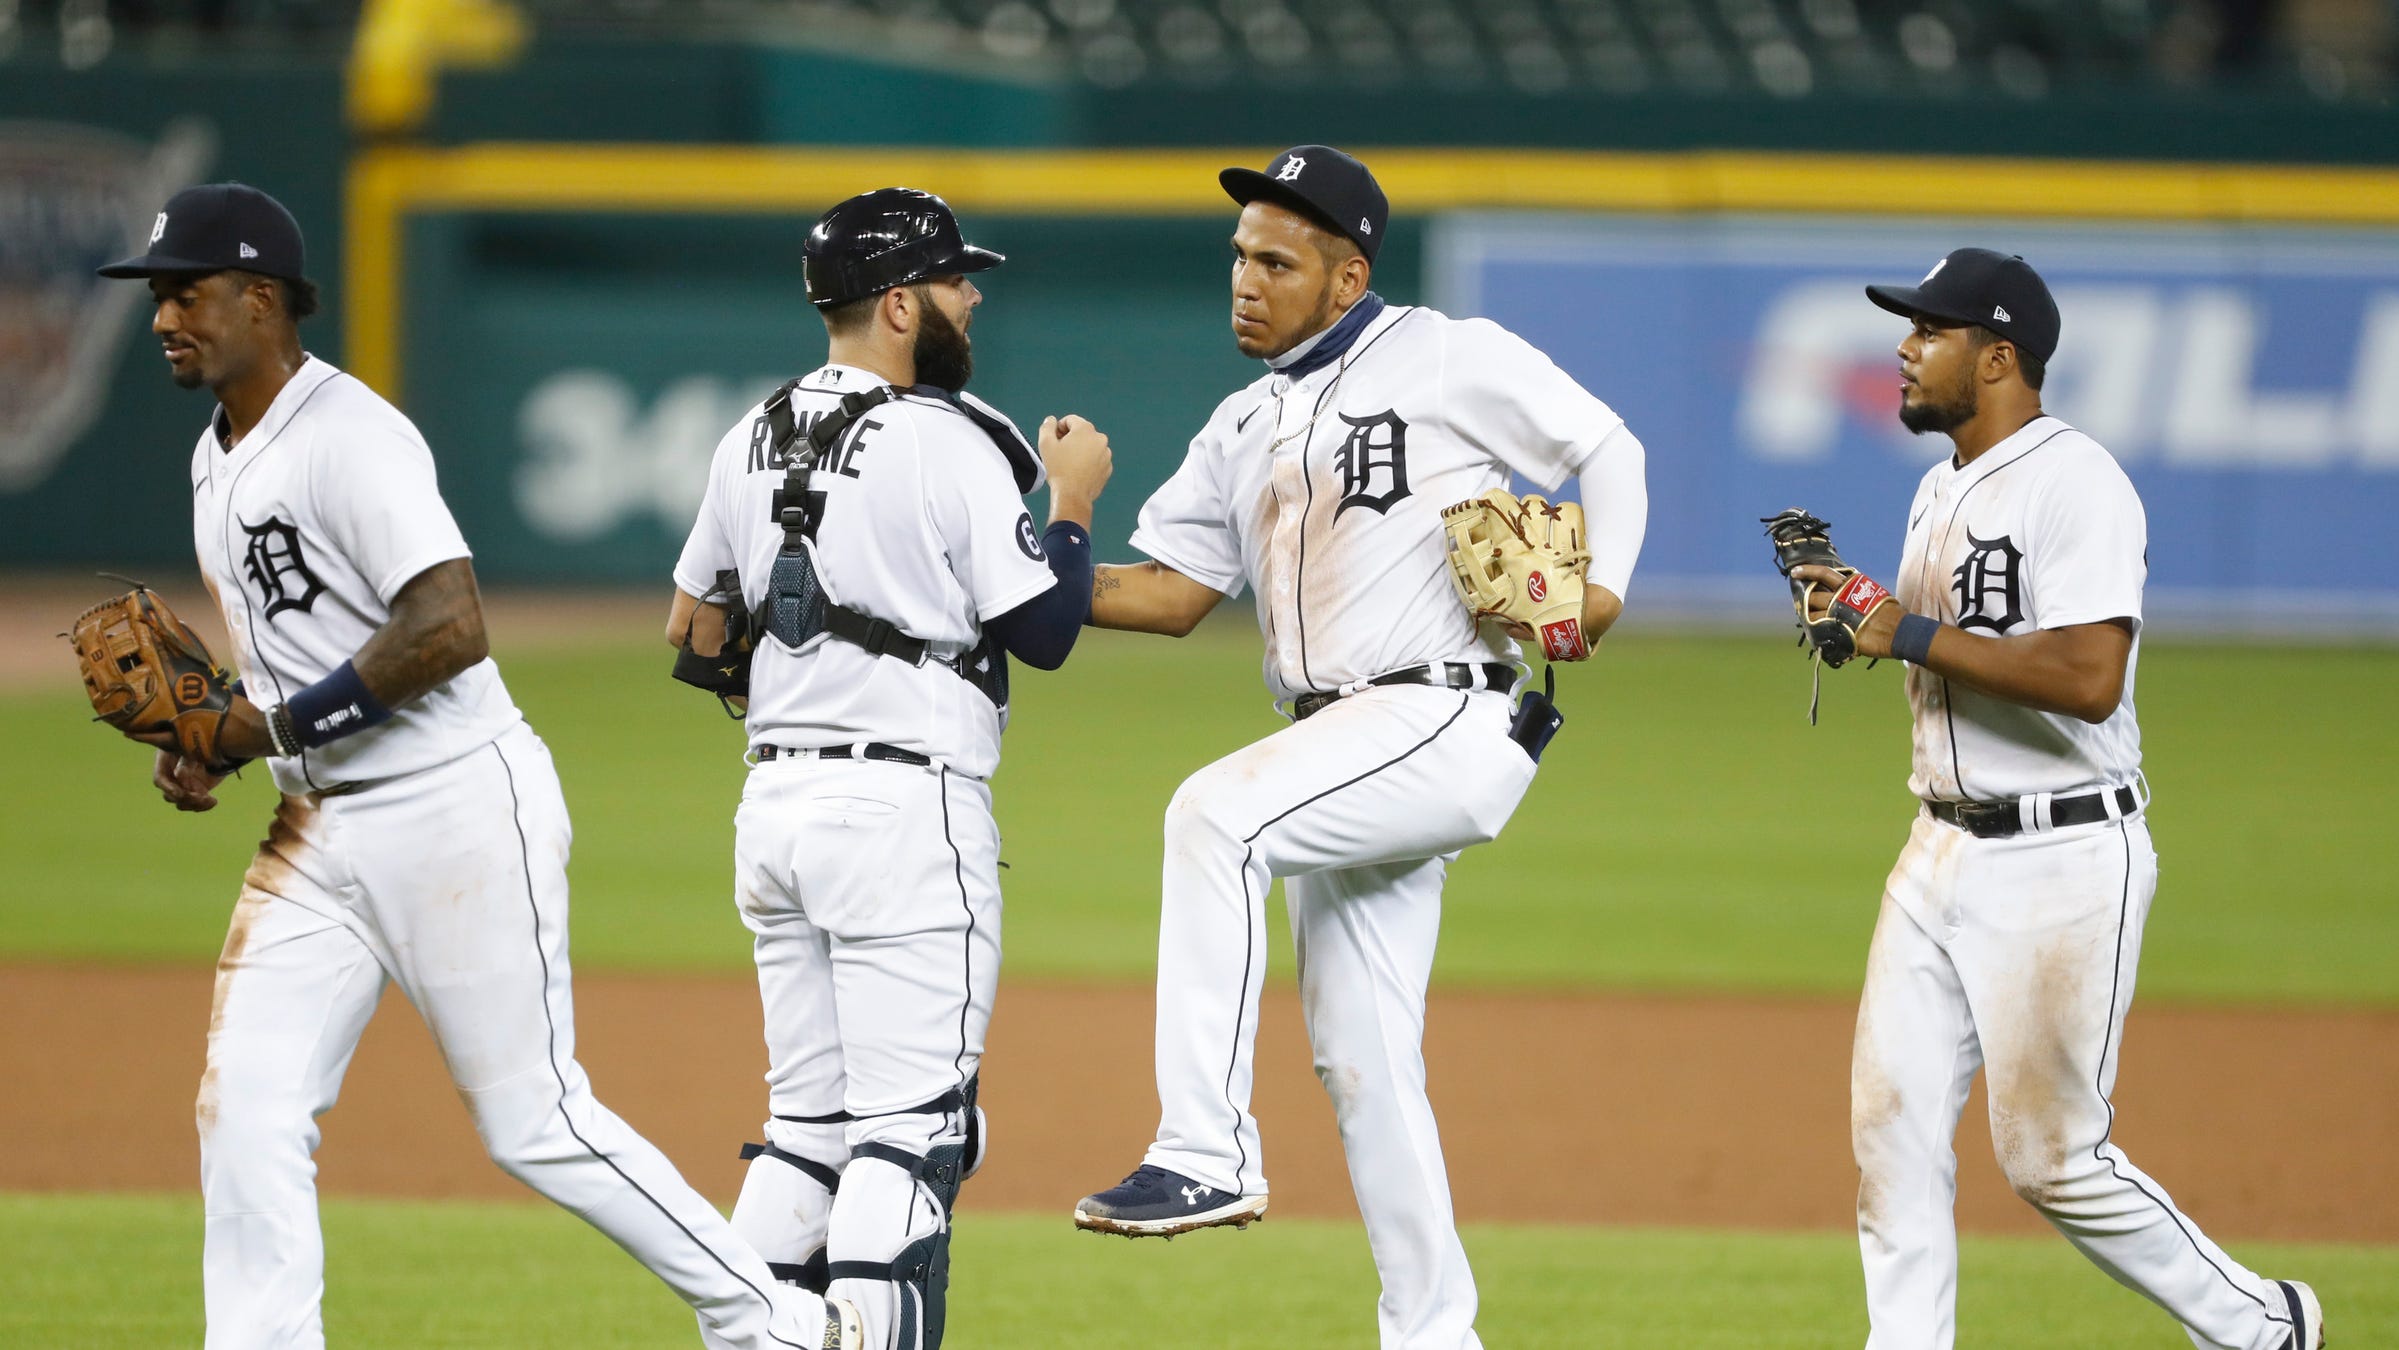 Can Detroit Tigers make playoffs? We predict the rest of the season